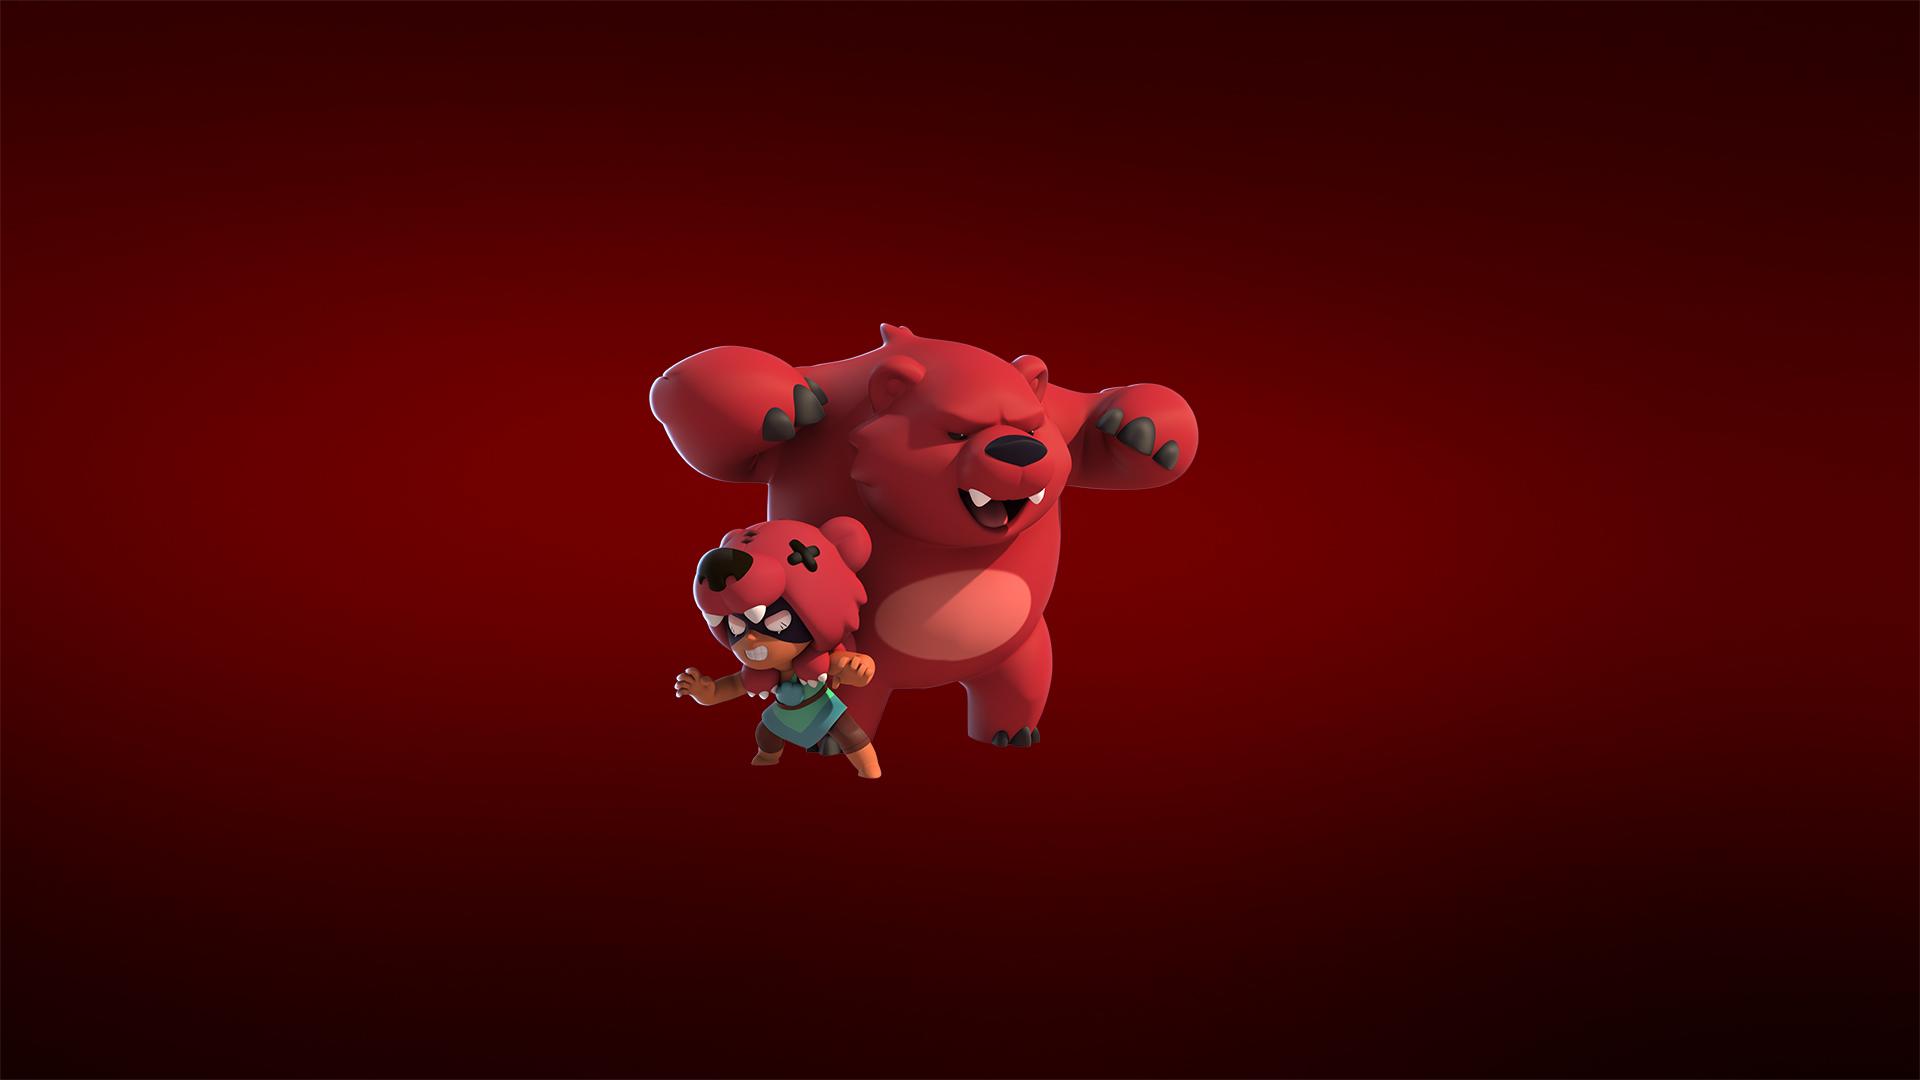 Nita With Her Bear Is The Best Wallpaper Image